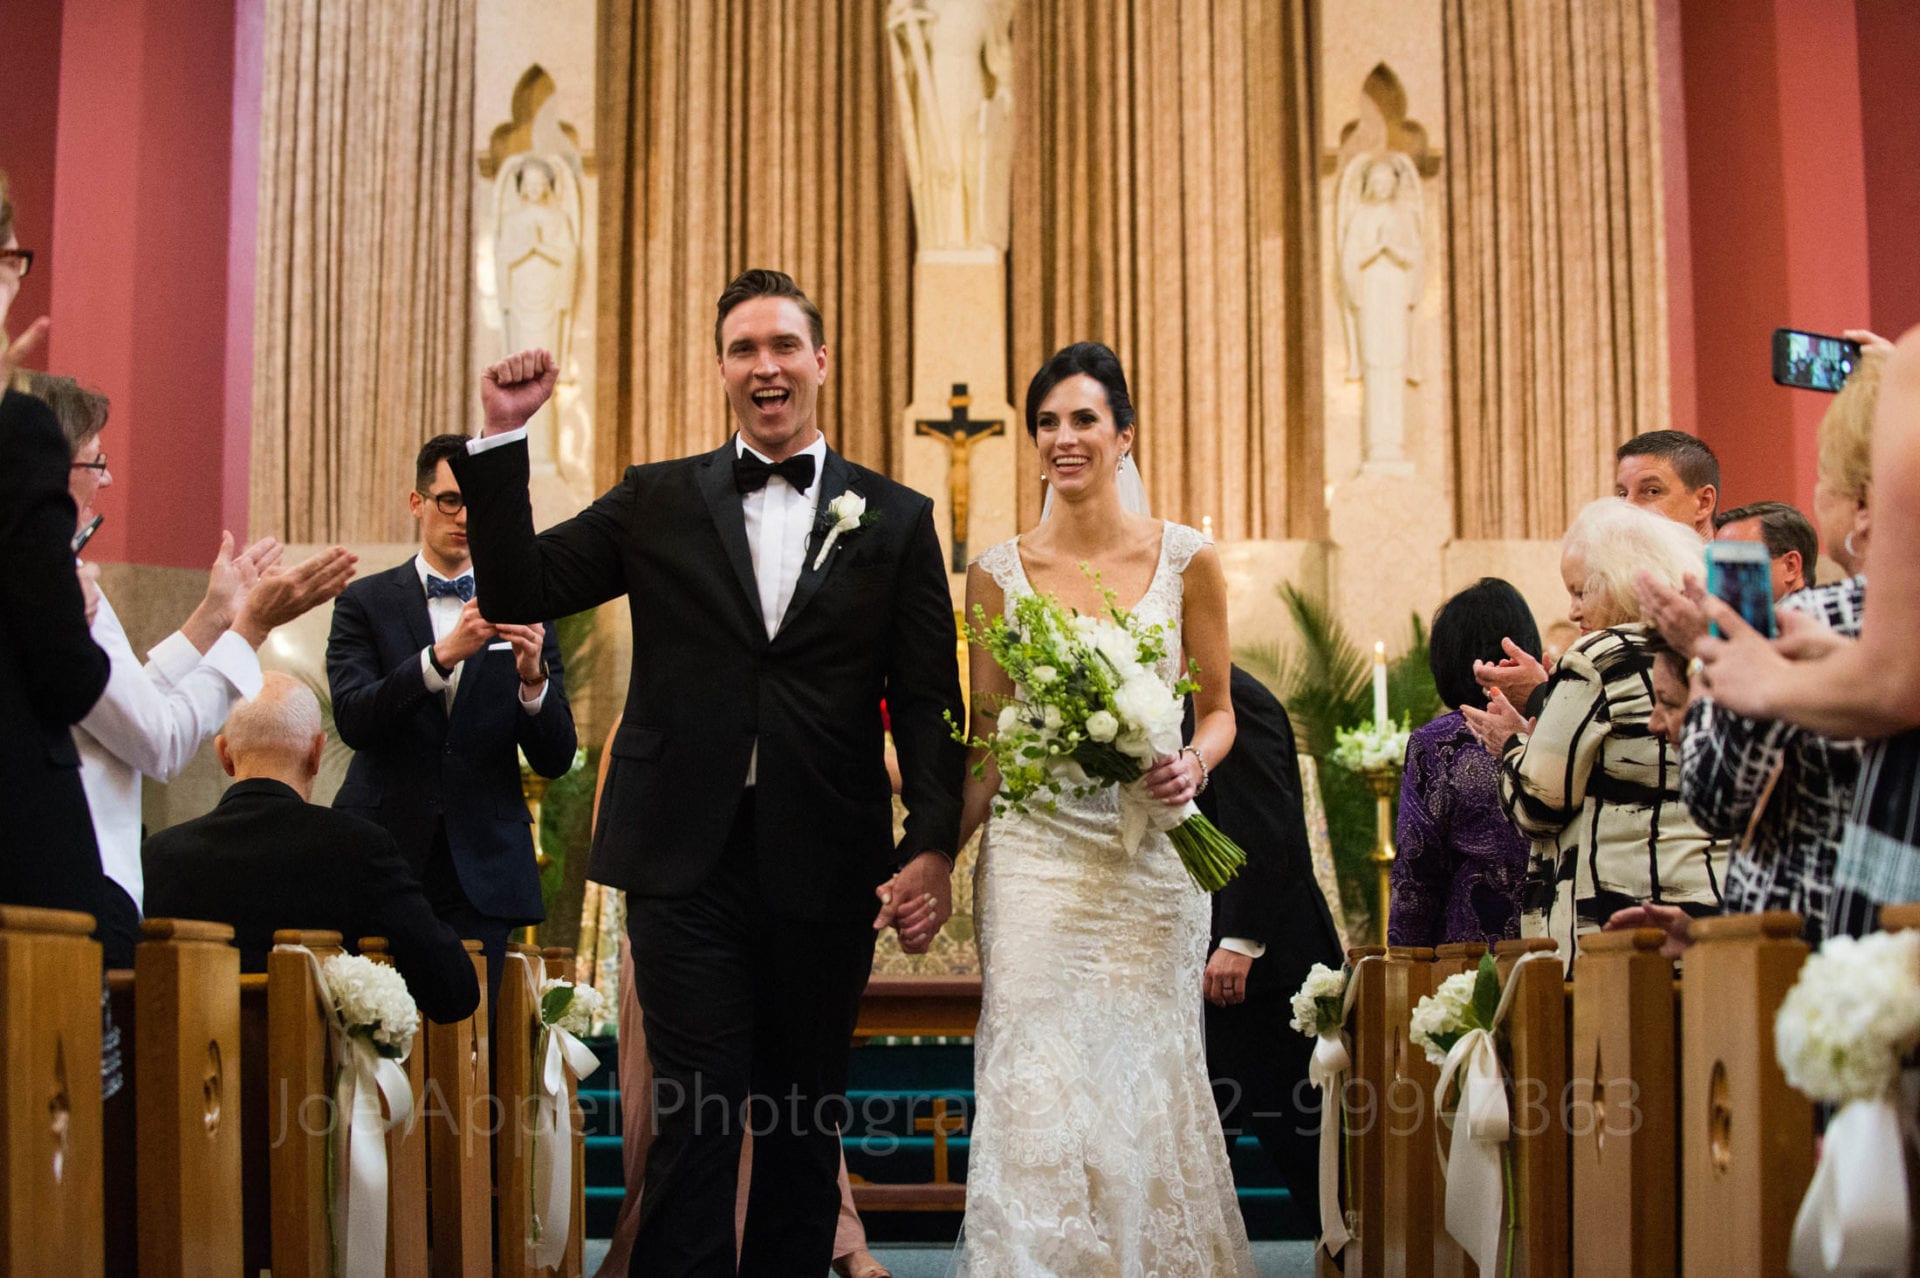 a groom raises his fist in the air as he and his bride start to make their way down the aisle of a church at the end of their wedding ceremony